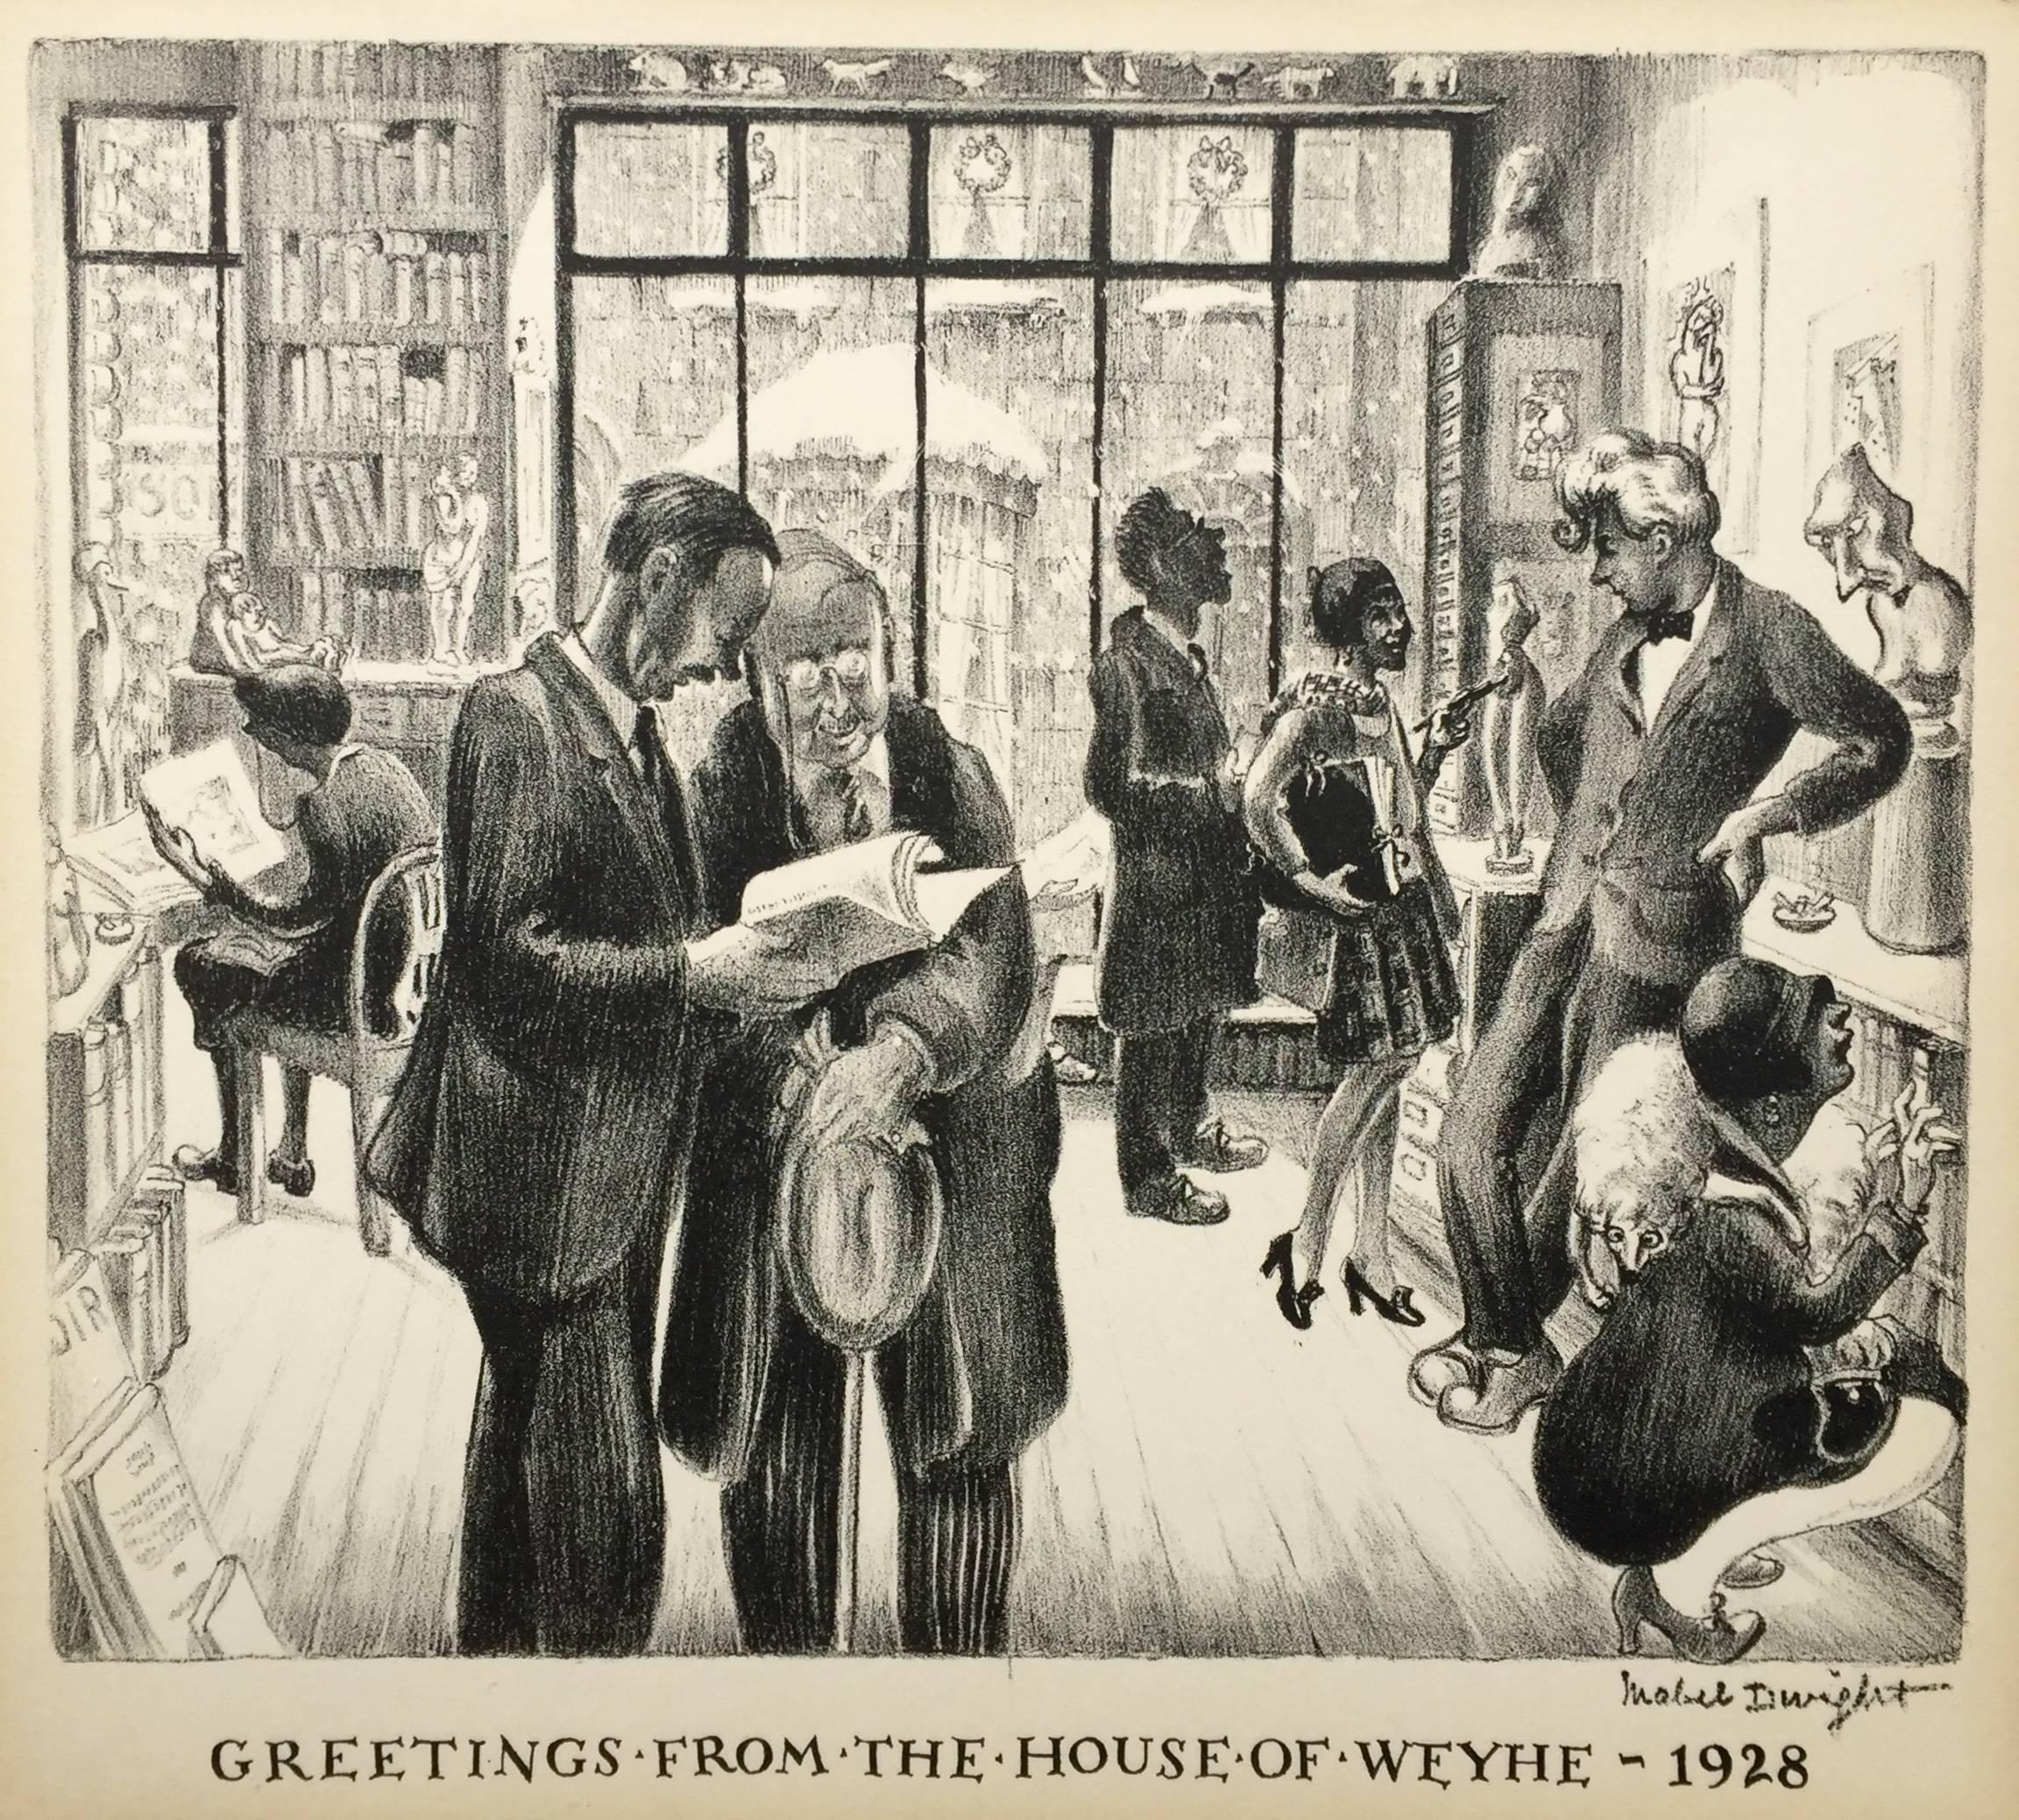 Greetings from the House of Weyhe - Print by Mabel Dwight